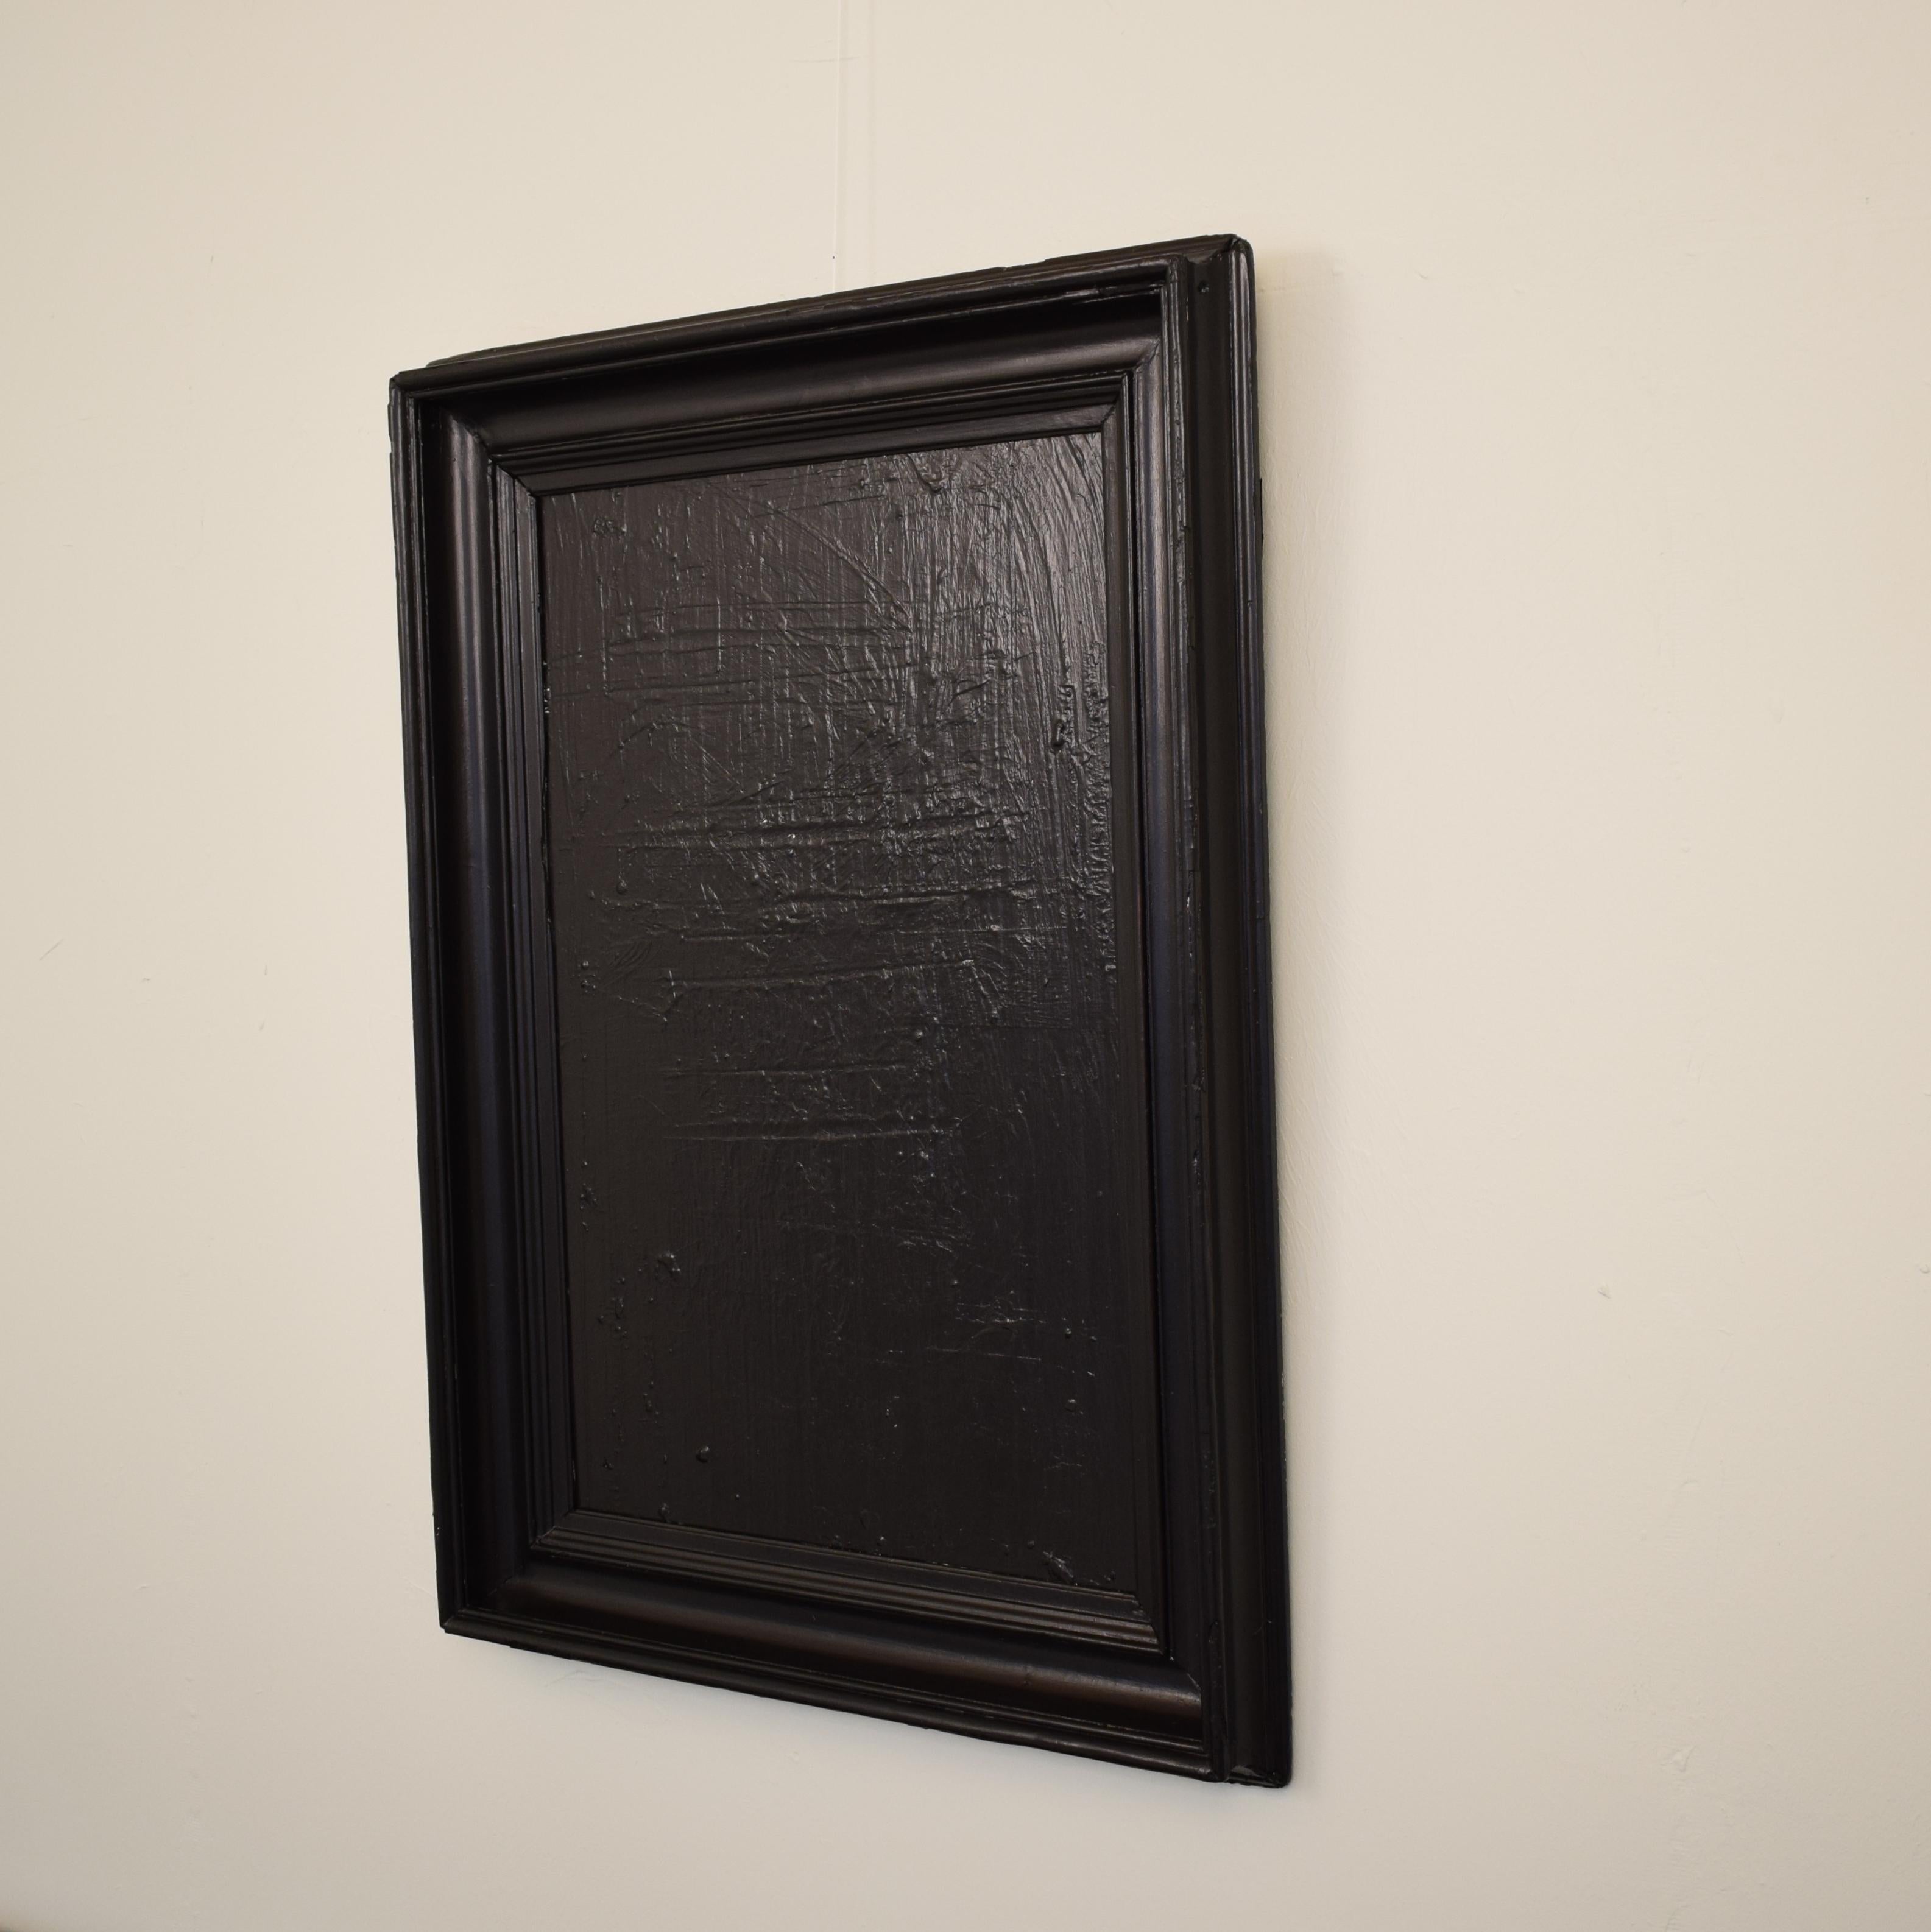 This black painting has heavily textured acrylics on canvas. The artist created the piece using multiple techniques like palet knife, brush and chalk. It is in an old 19th century picture frame. The painting would complement a modern interior design